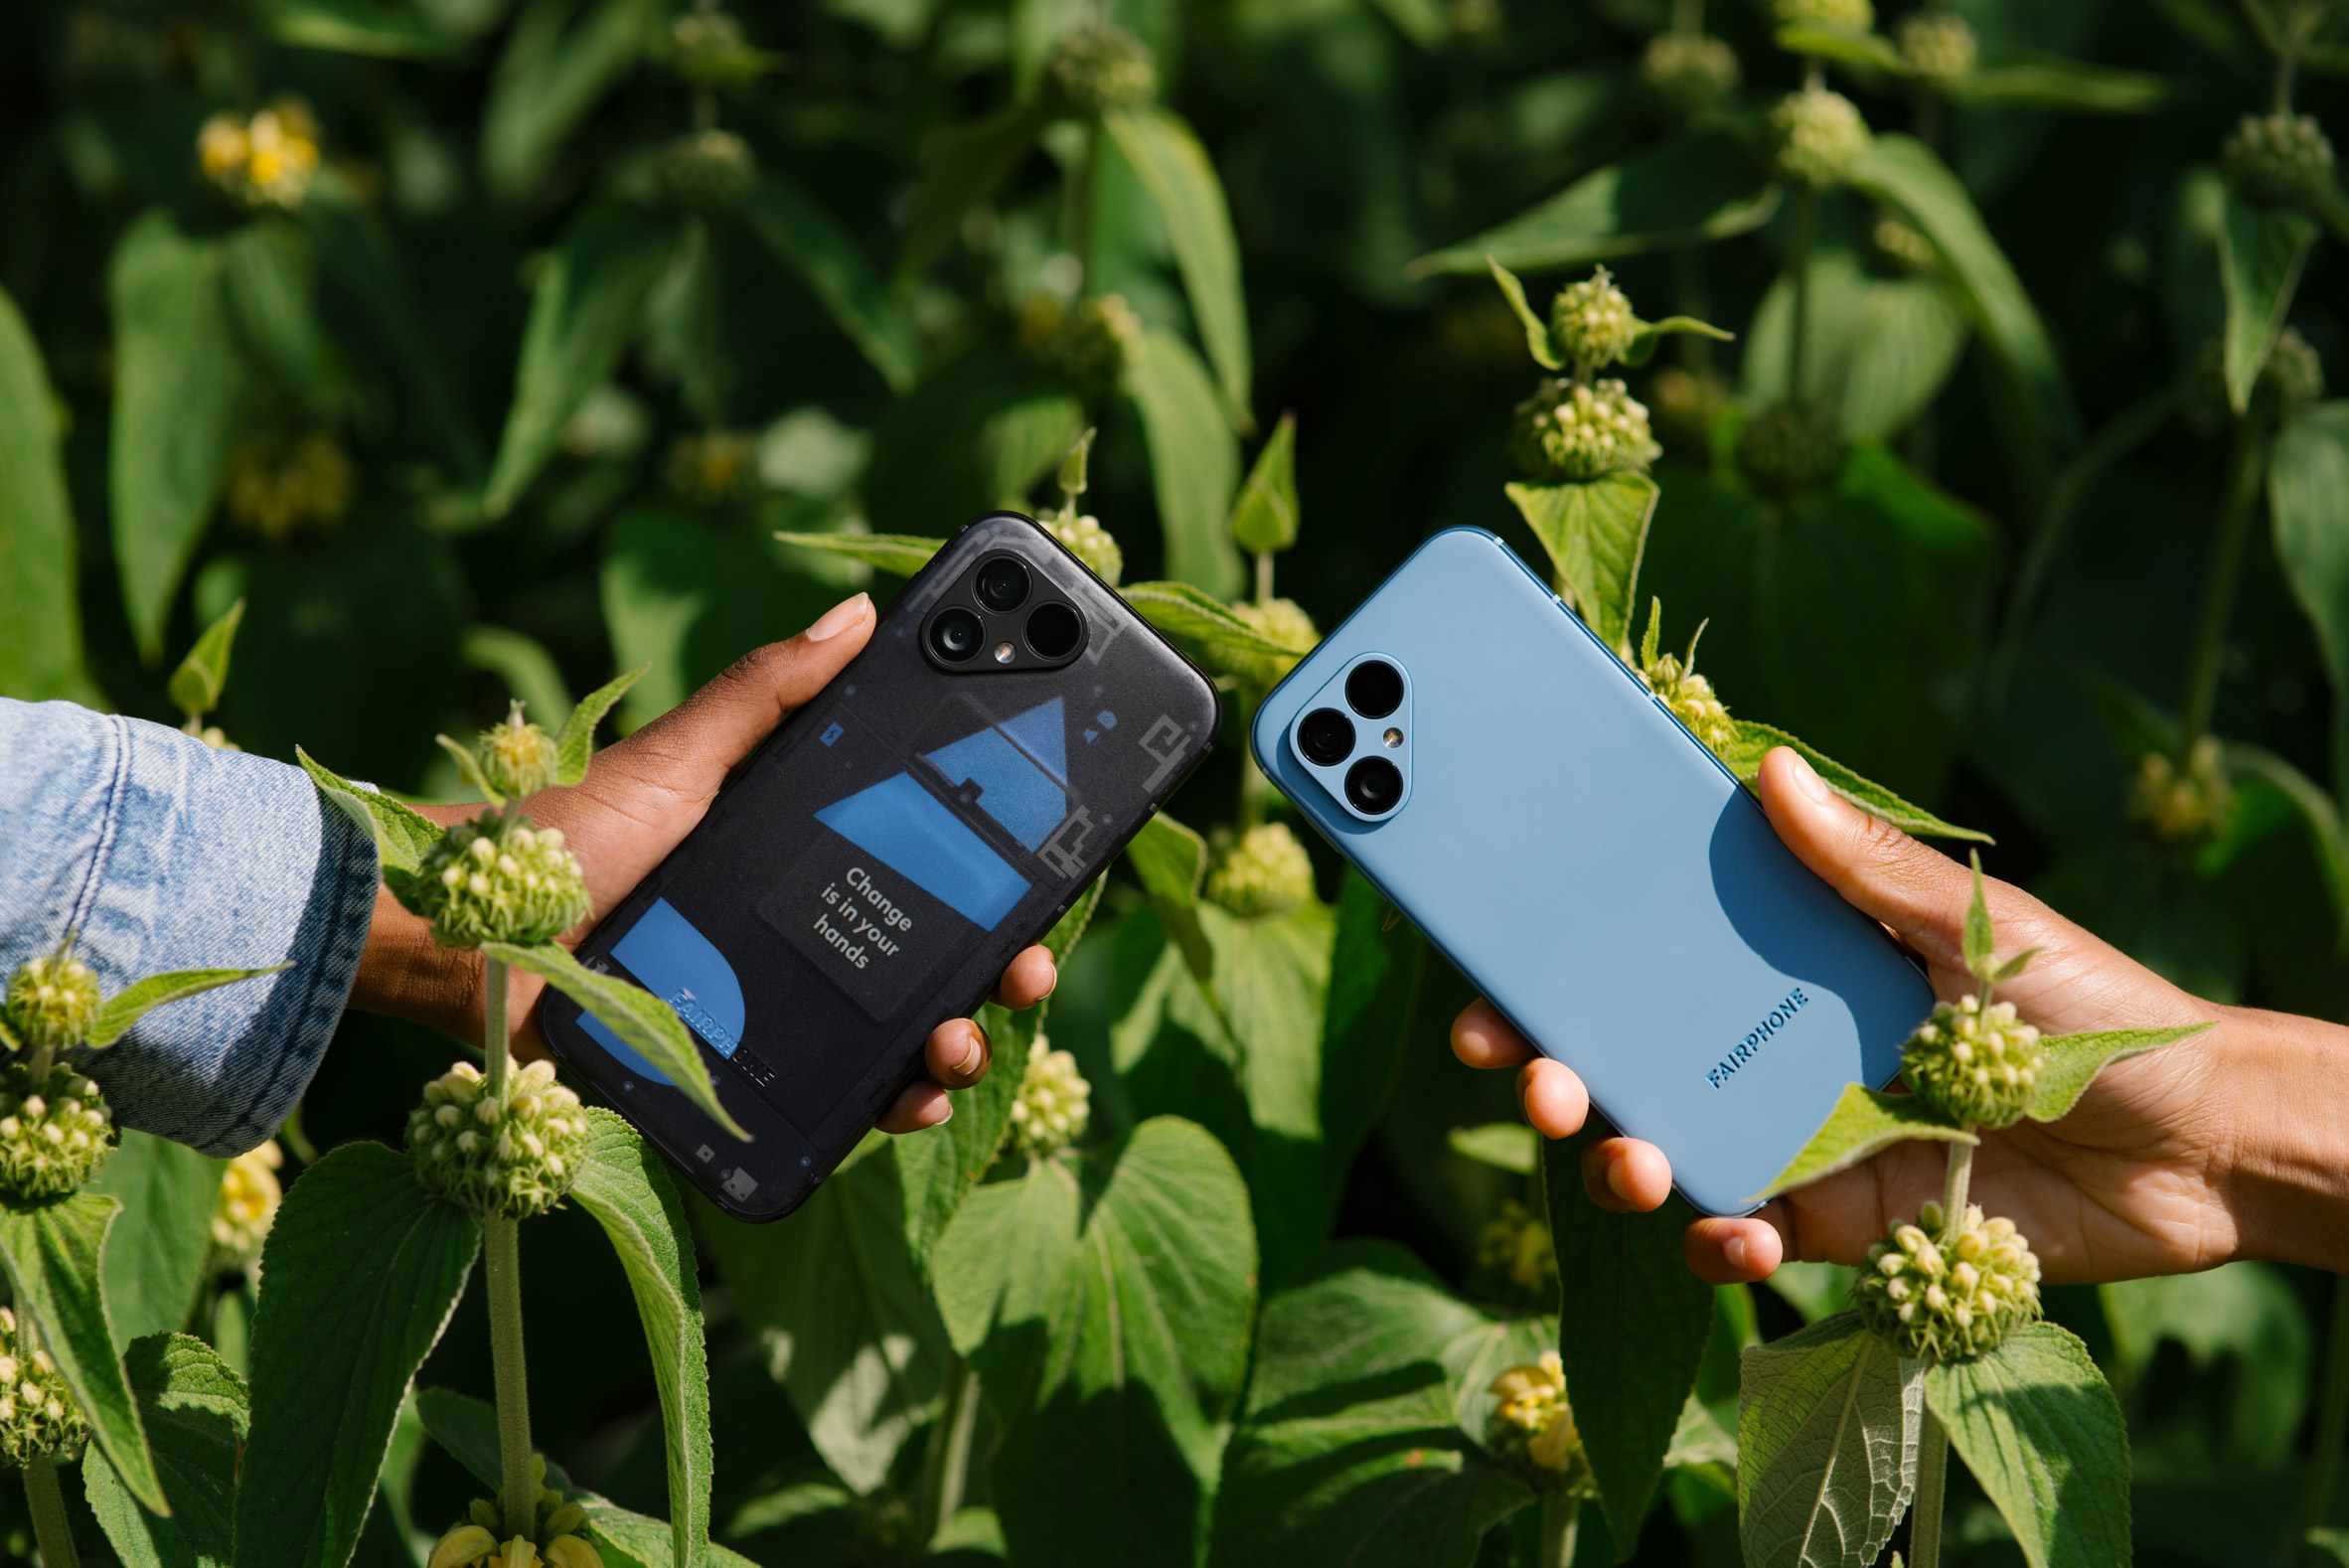 Photo of two editions of the Fairphone 5, one in a blue colour, one transparent, being touched together like clinking glasses against a background of green foliage